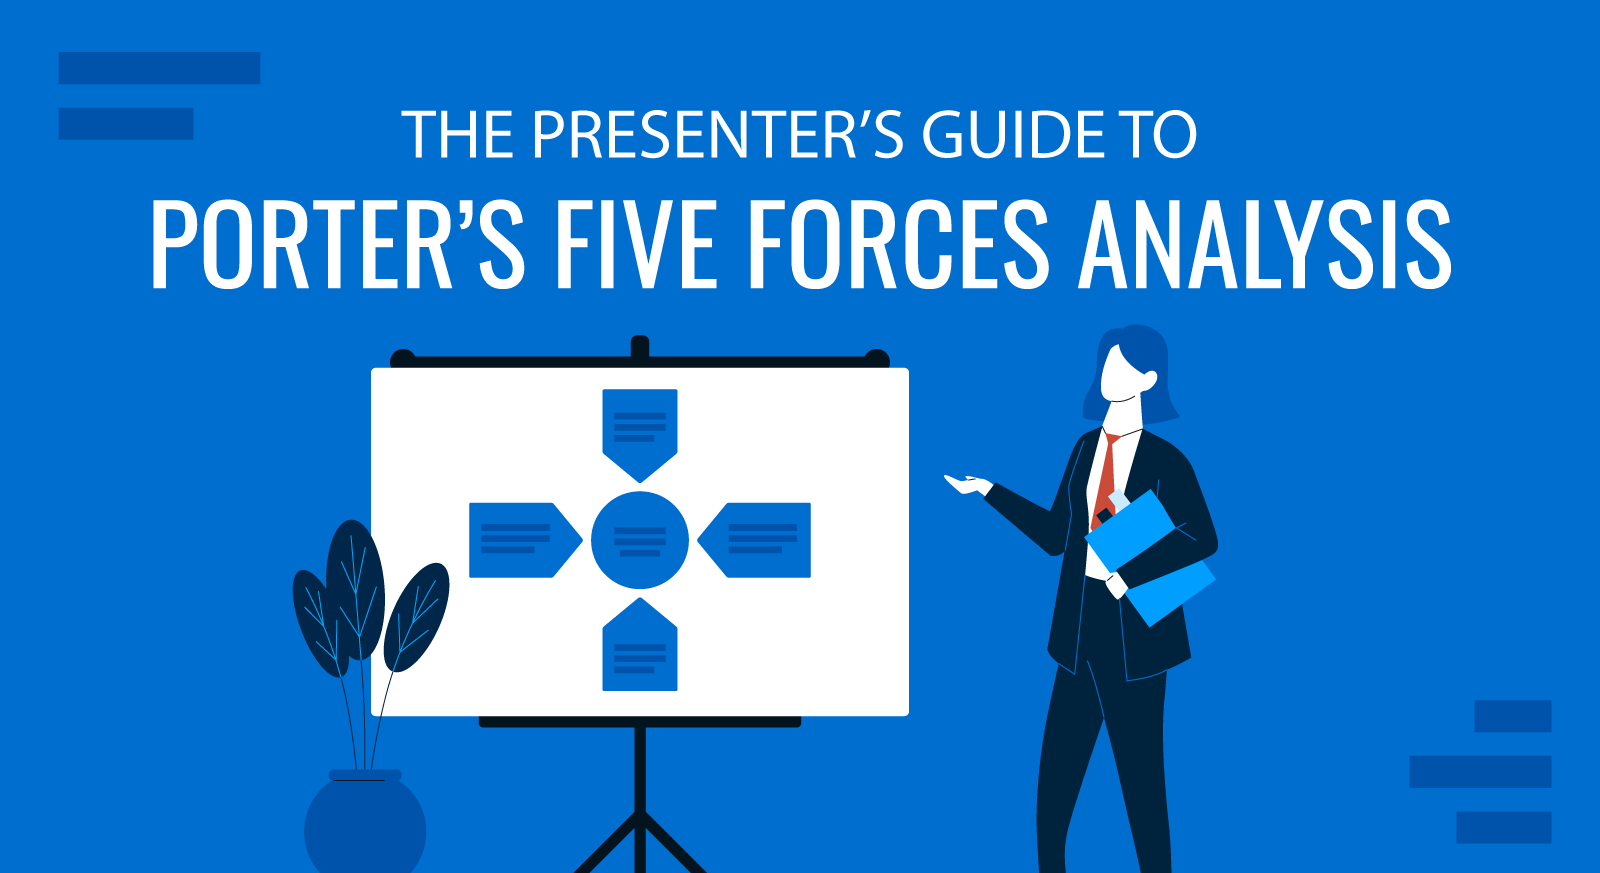 The Presenter's Guide to Porter’s Five Forces Analysis